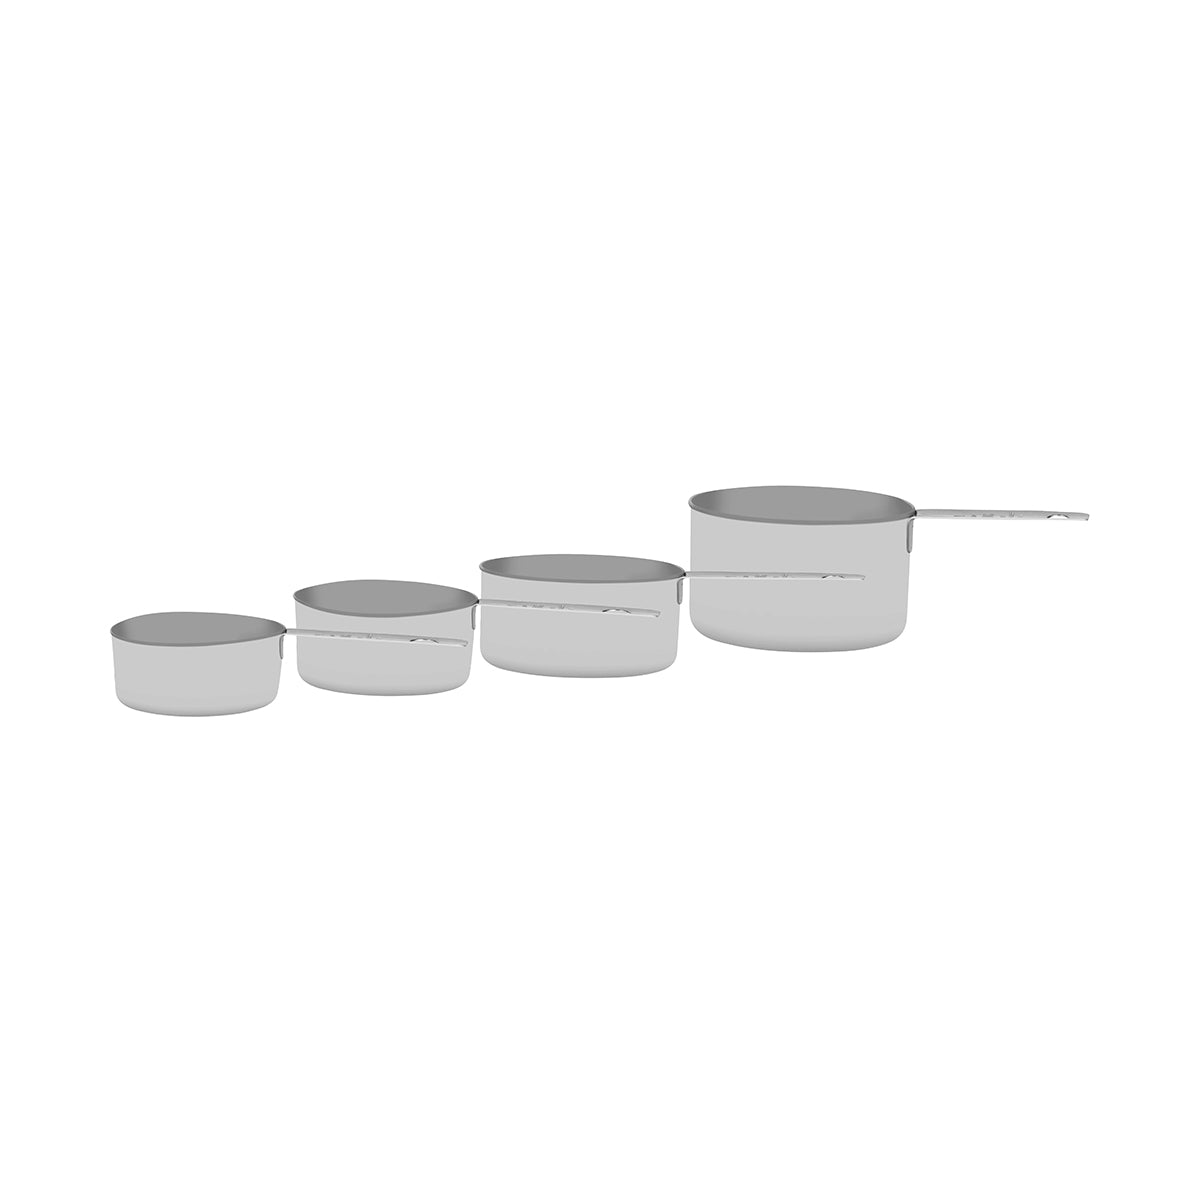 66465 Chef Inox Measuring Cup Set Solid Handle 4pc Tomkin Australia Hospitality Supplies